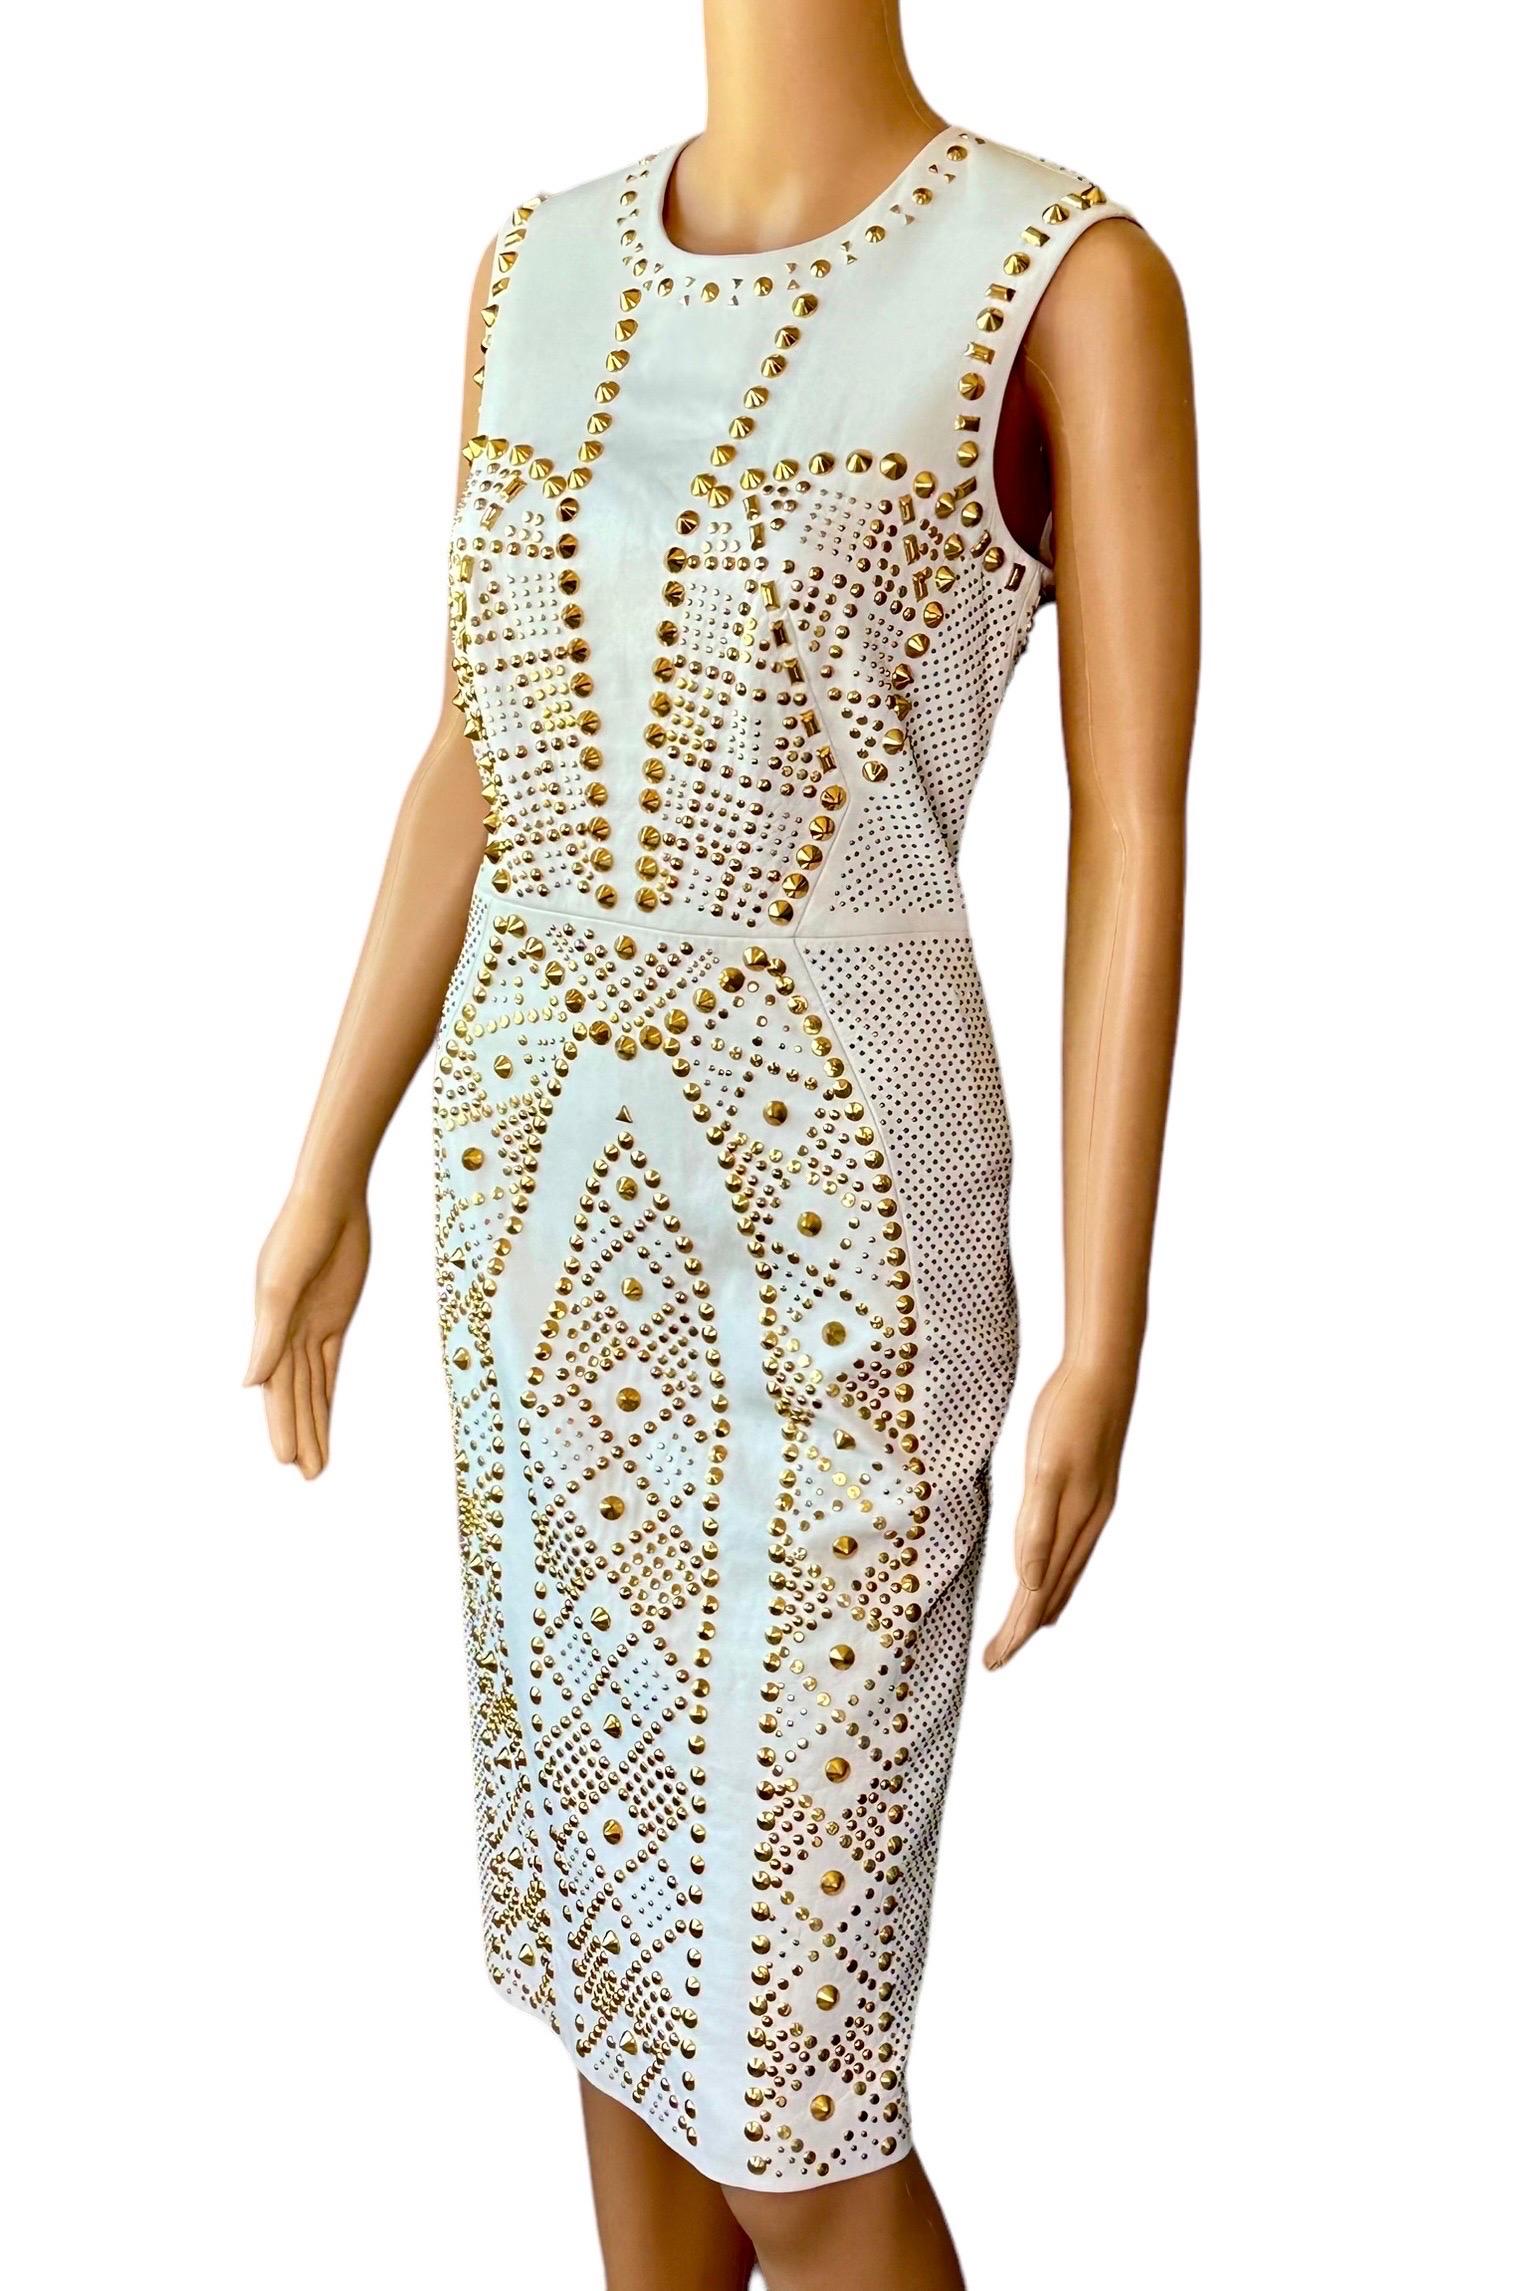 Versace S/S 2012 Runway Embellished Gold Studded Ivory Leather Dress  In Good Condition For Sale In Naples, FL